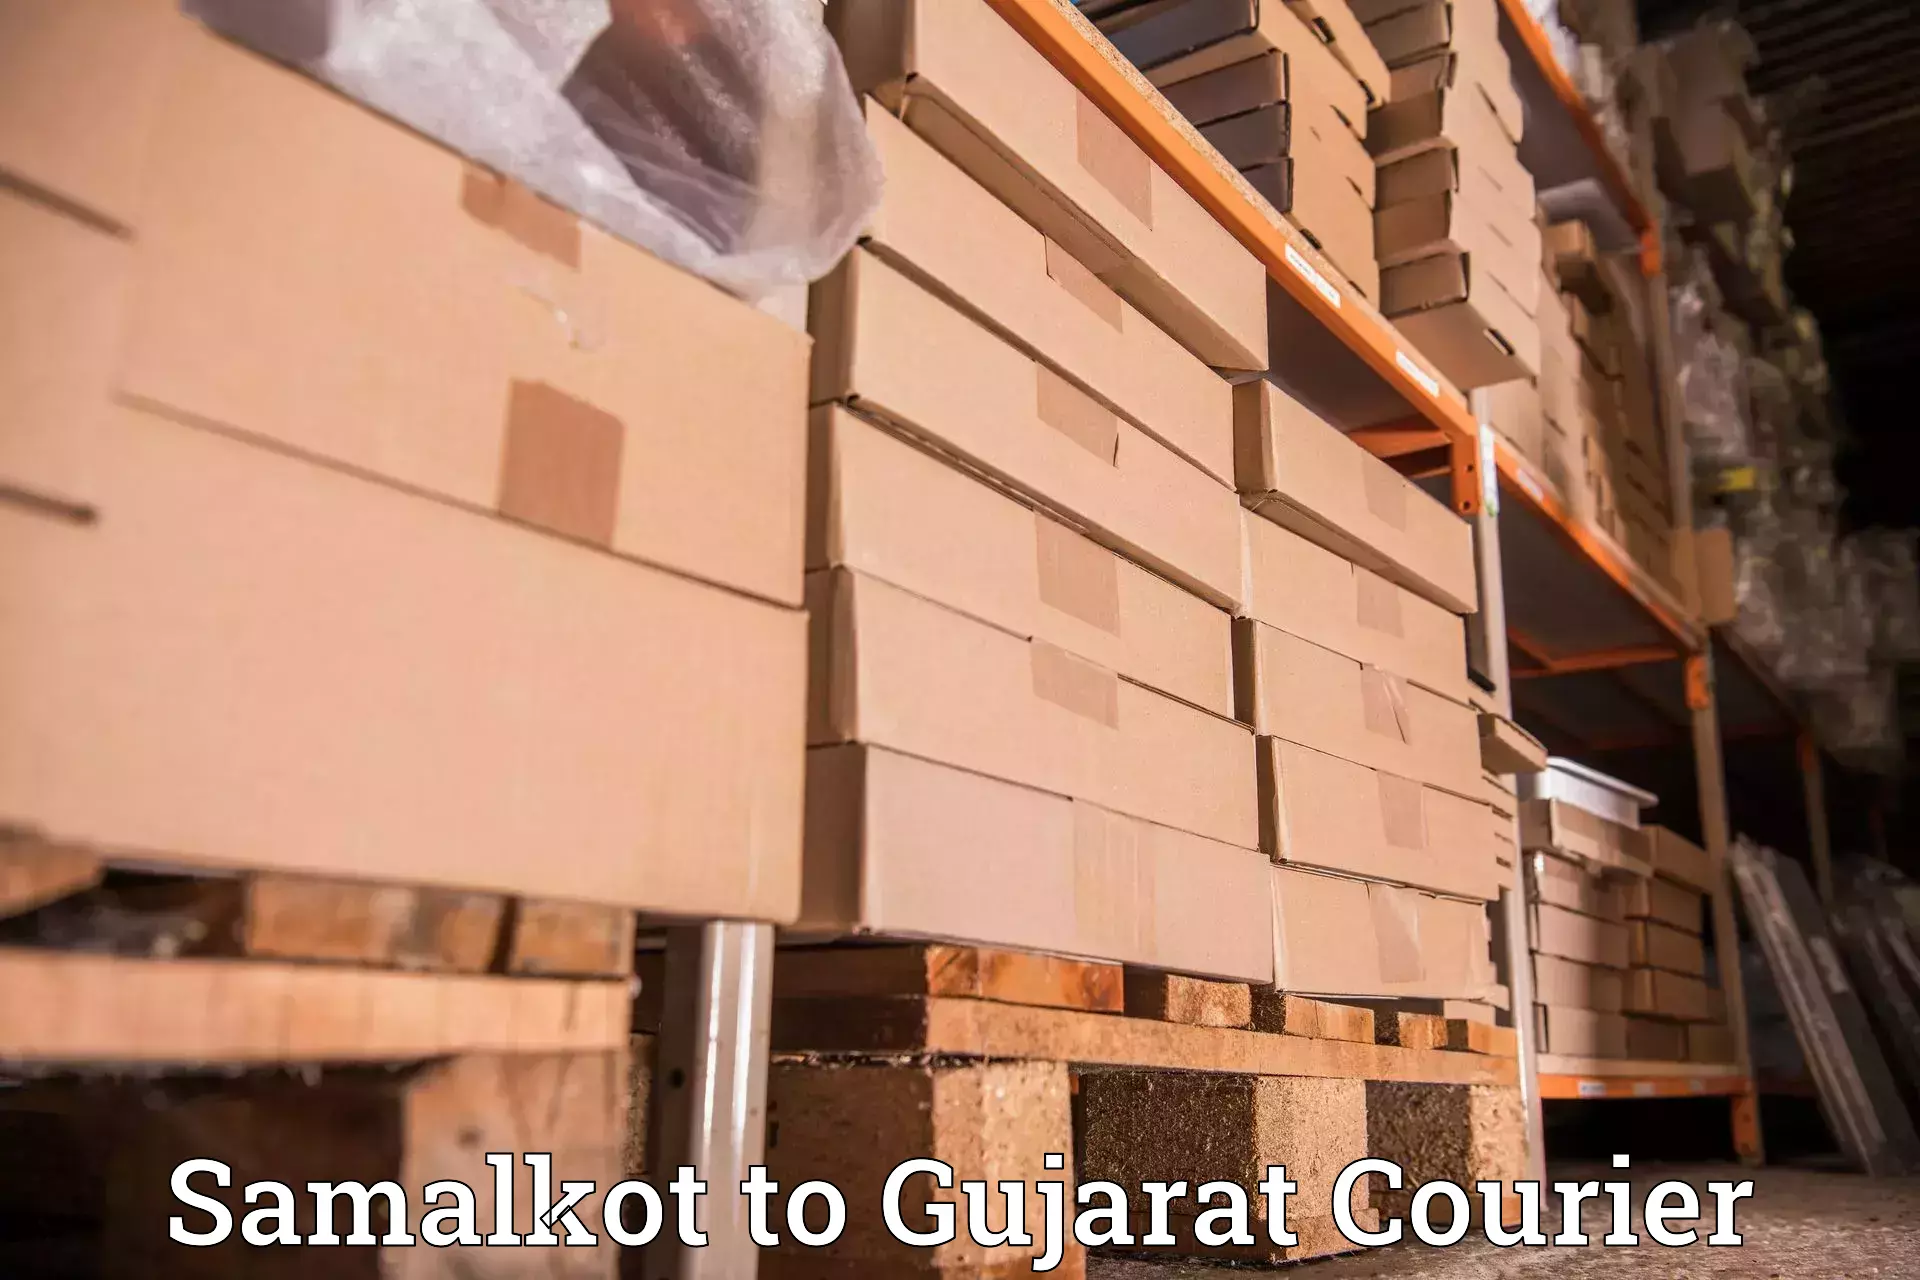 Courier service booking Samalkot to Dhanera